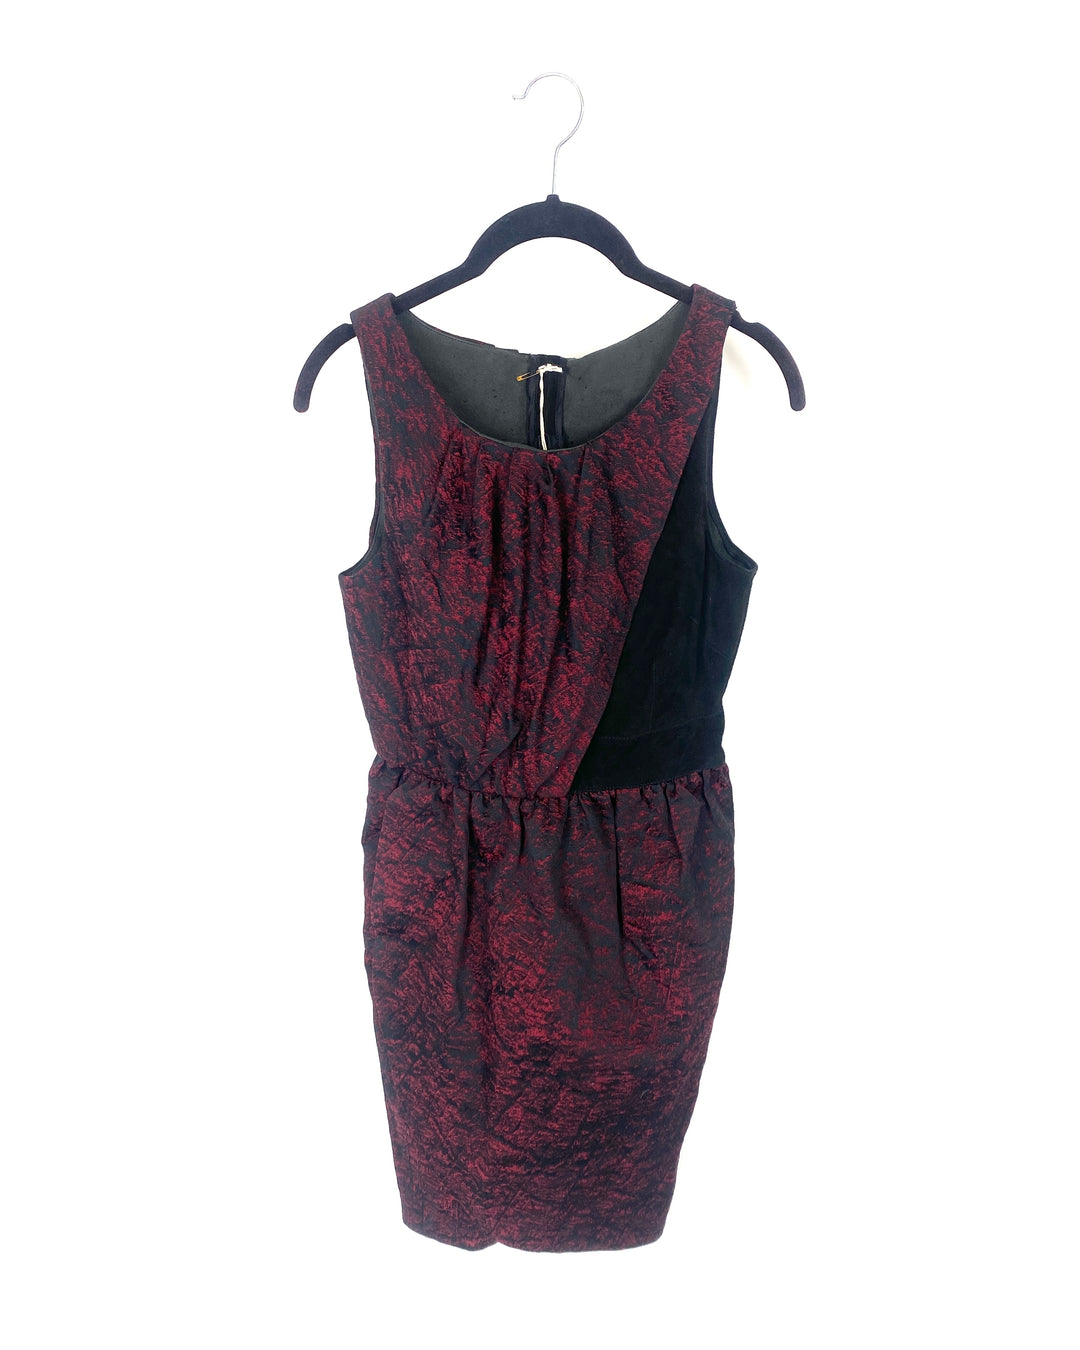 Red and Black Patterned Dress - Small